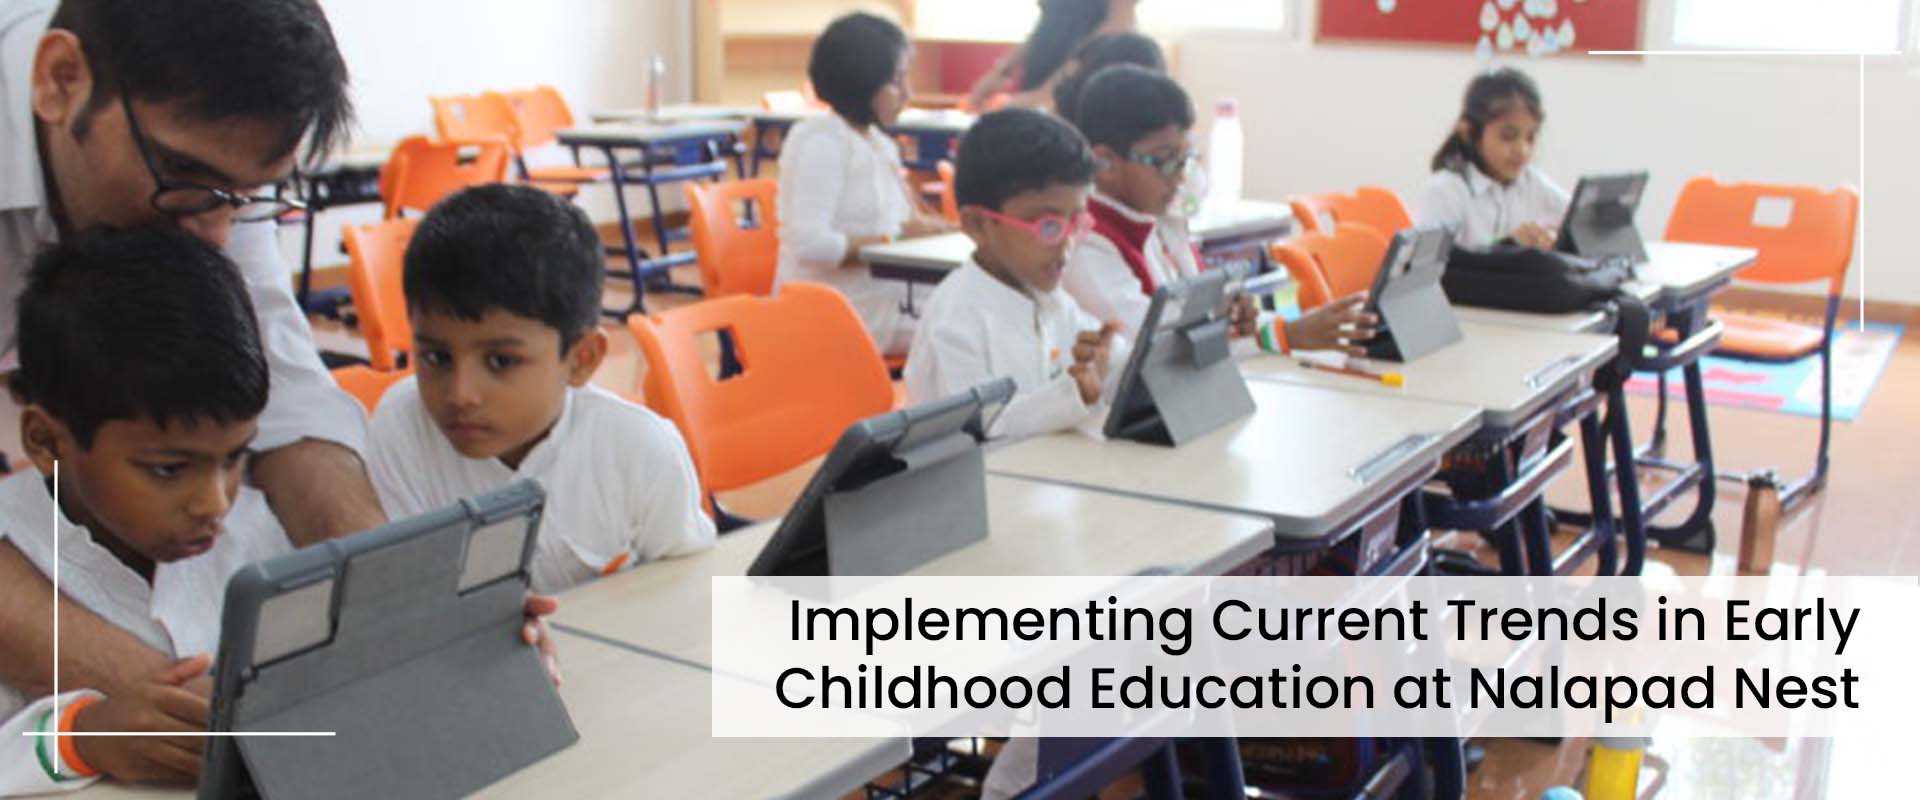 Implementing Current Trends In Early Childhood Education At Nalapad Nest